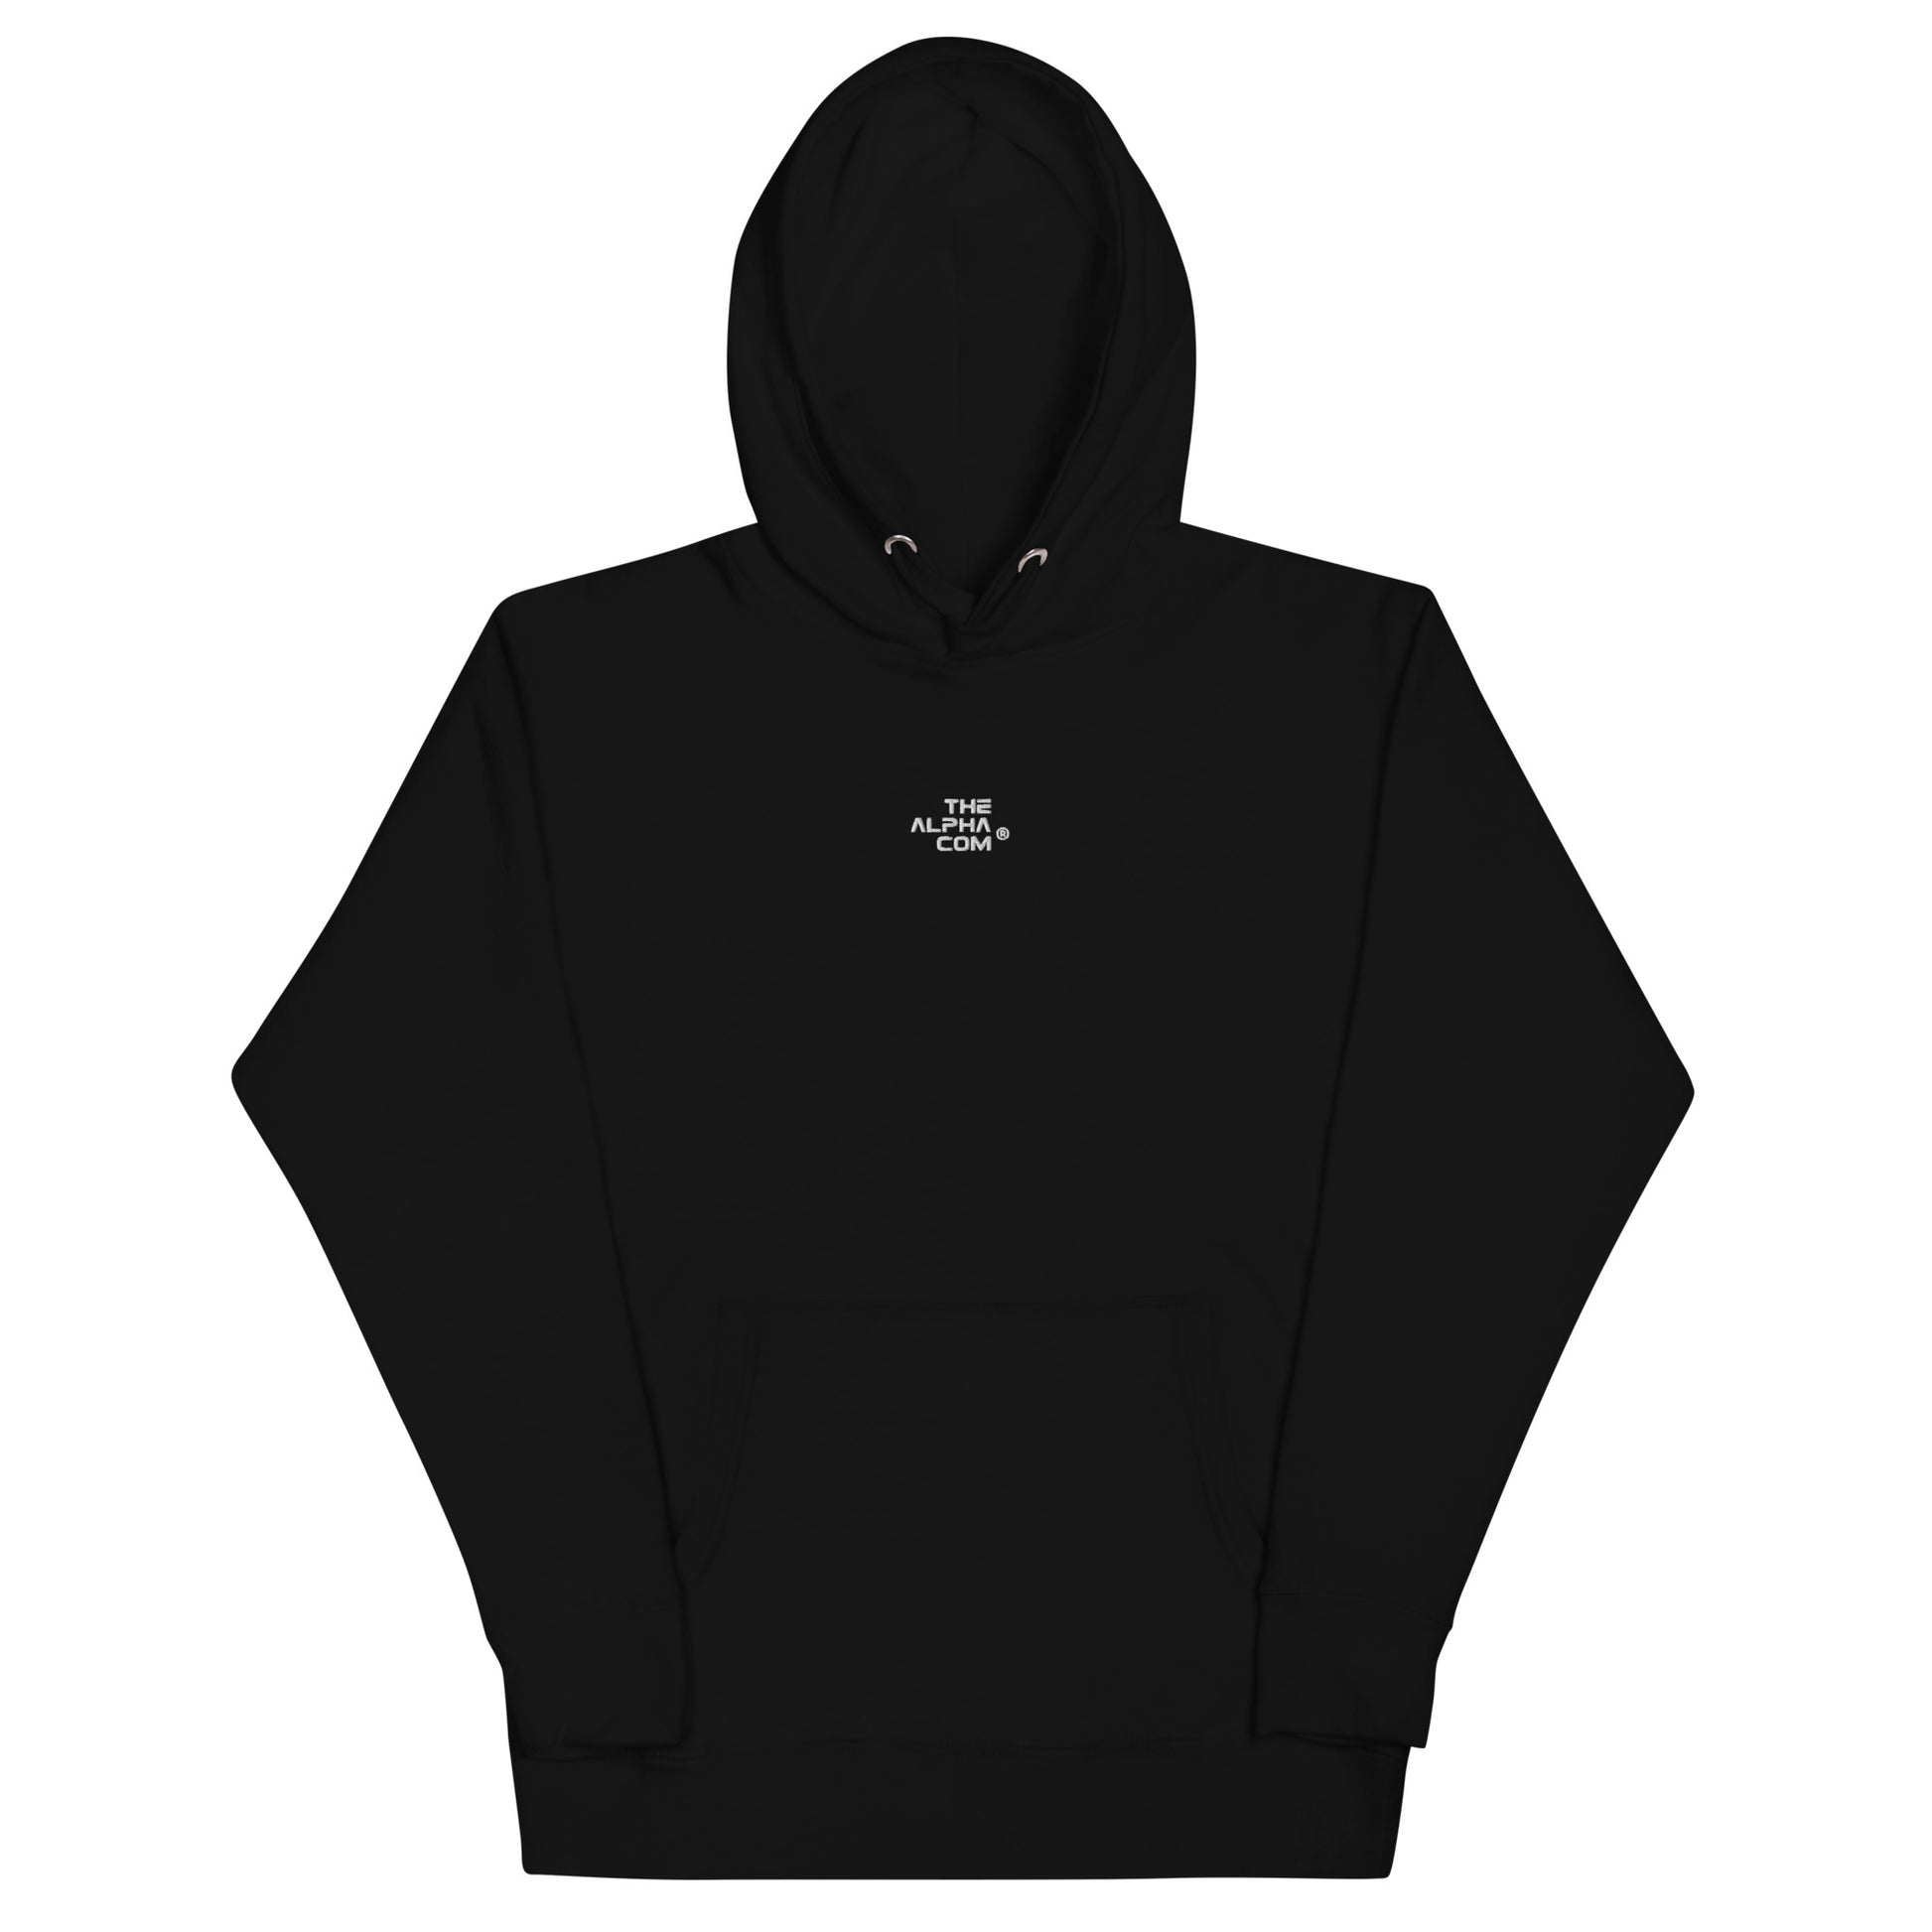 THE ALPHA COM ® GRW embroidered Unisex Hoodie